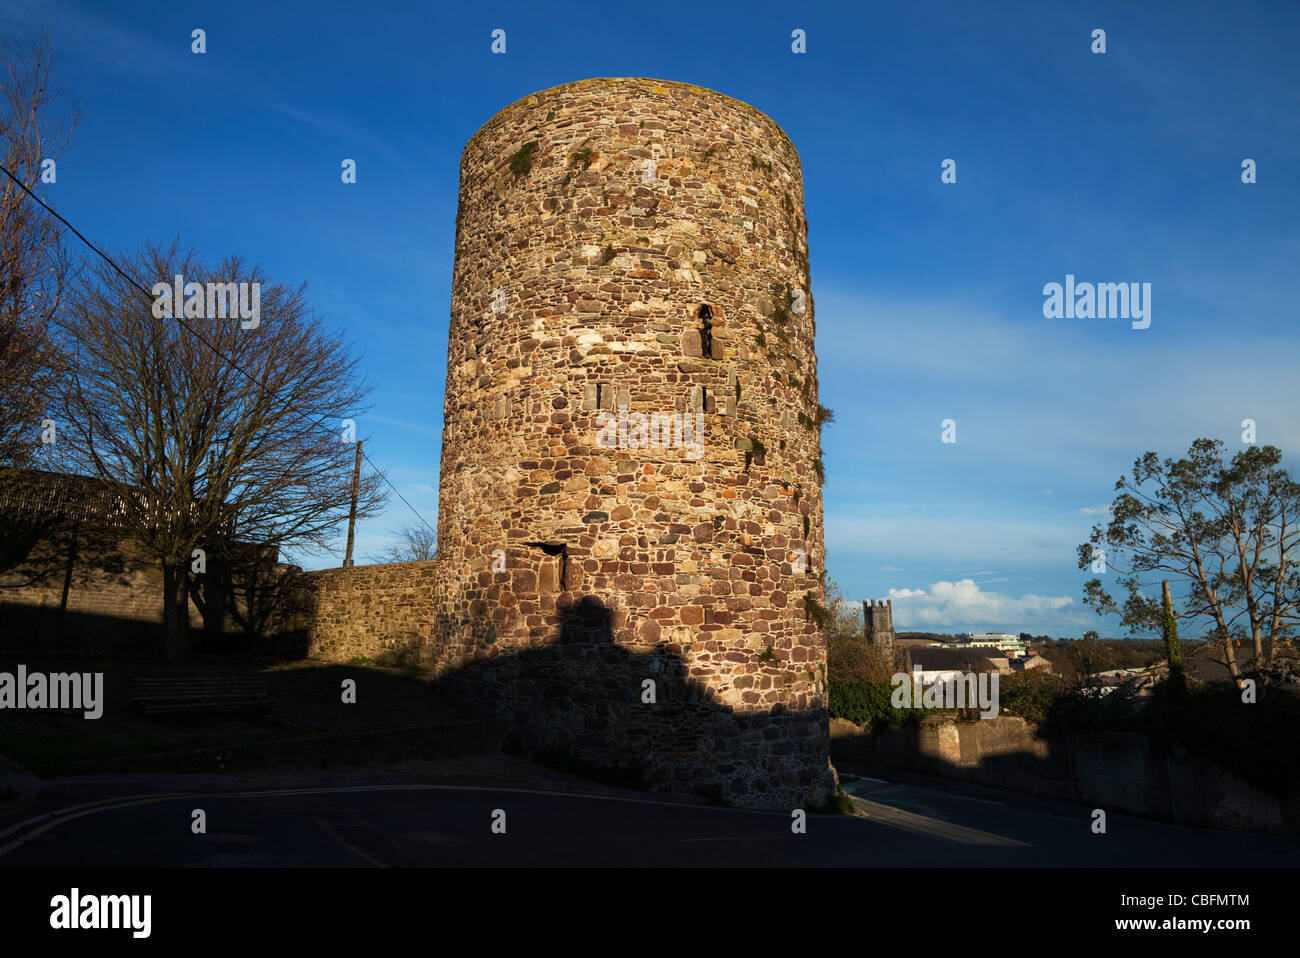 The Restored 13th Century French Tower and City Walls, Castle Street, Waterford City, Ireland Stock Photo